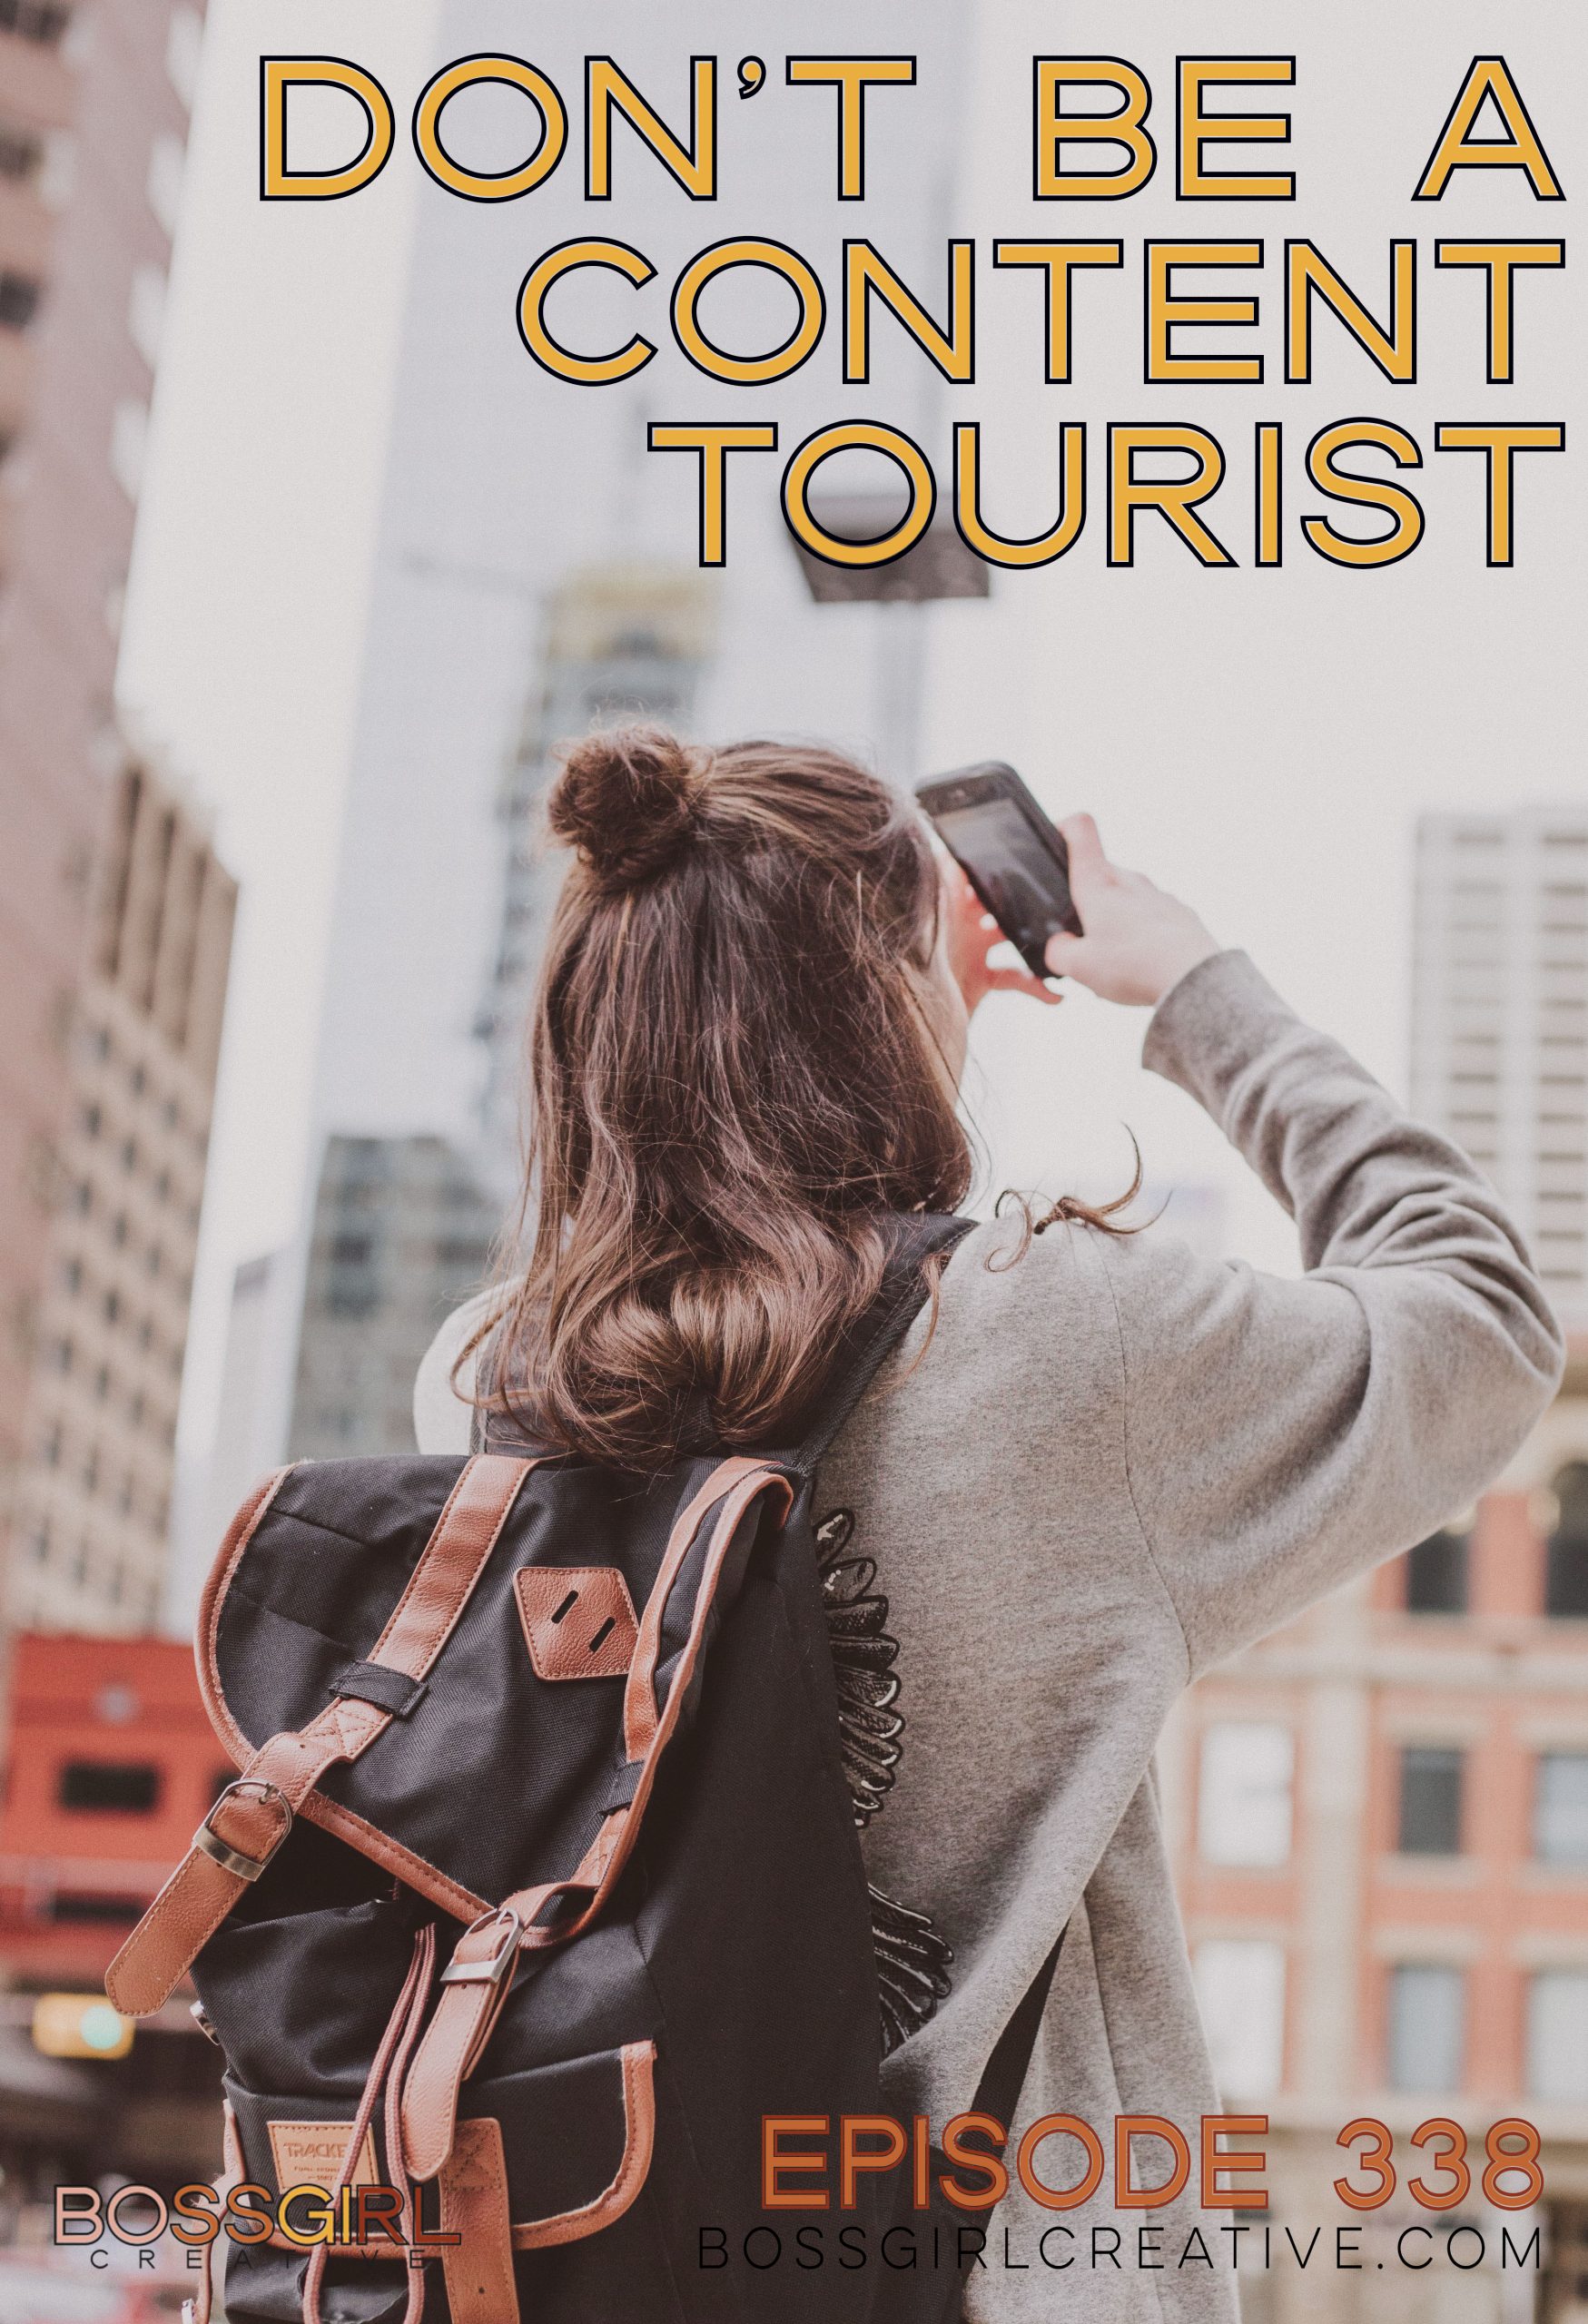 Boss Girl Creative Podcast Episode 338 - Don't Be a Content Tourist